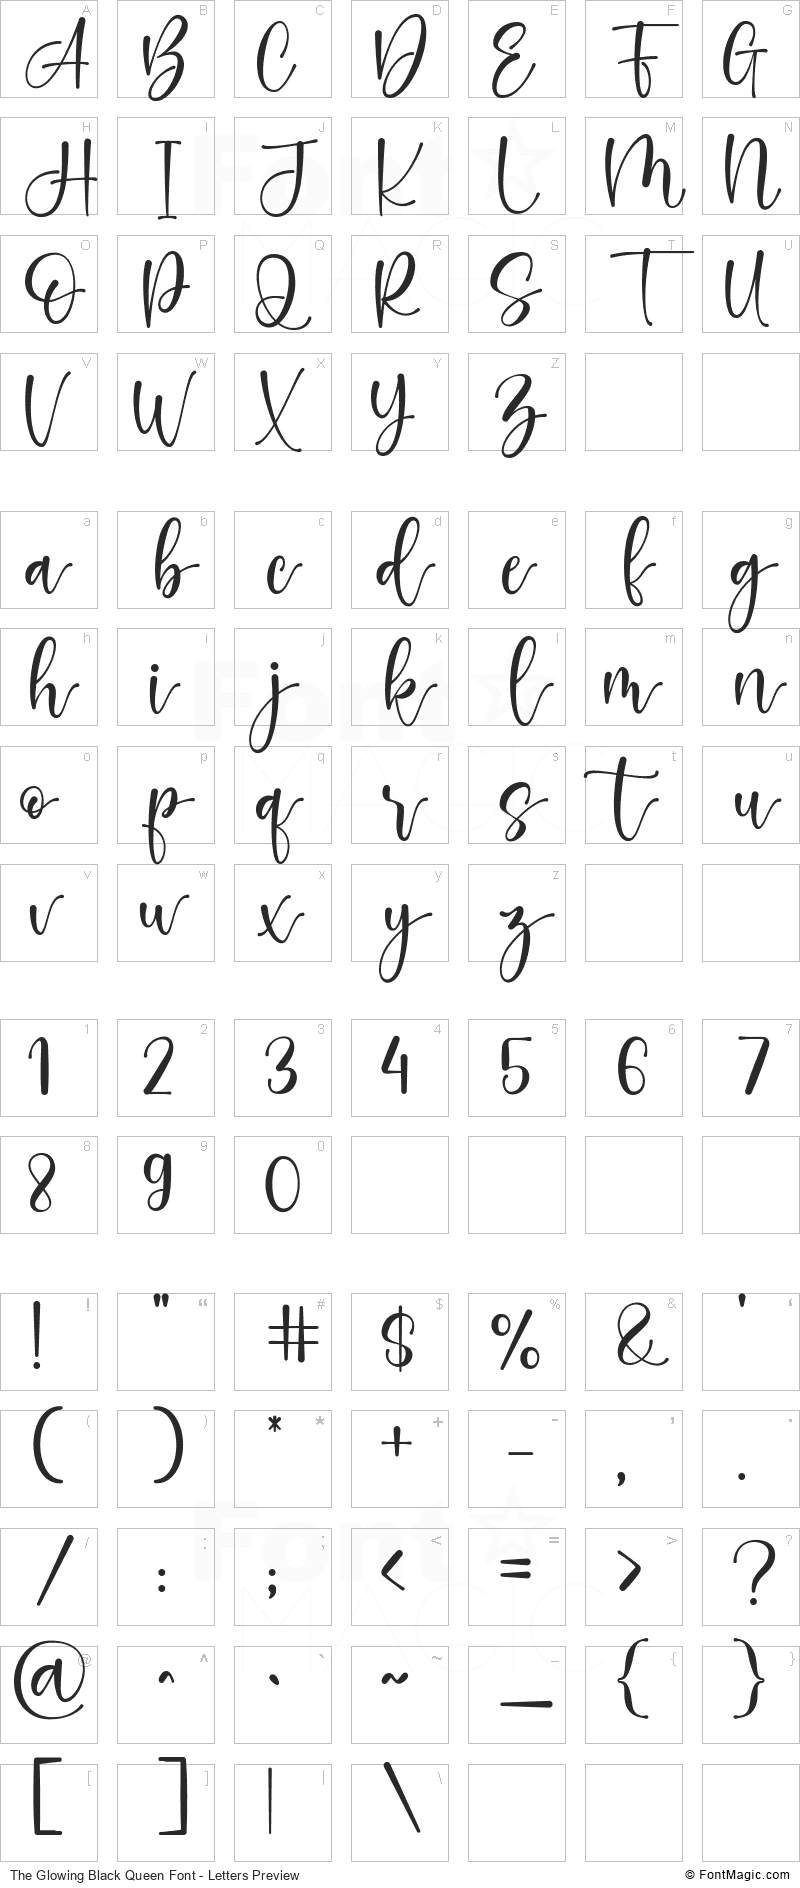 The Glowing Black Queen Font - All Latters Preview Chart